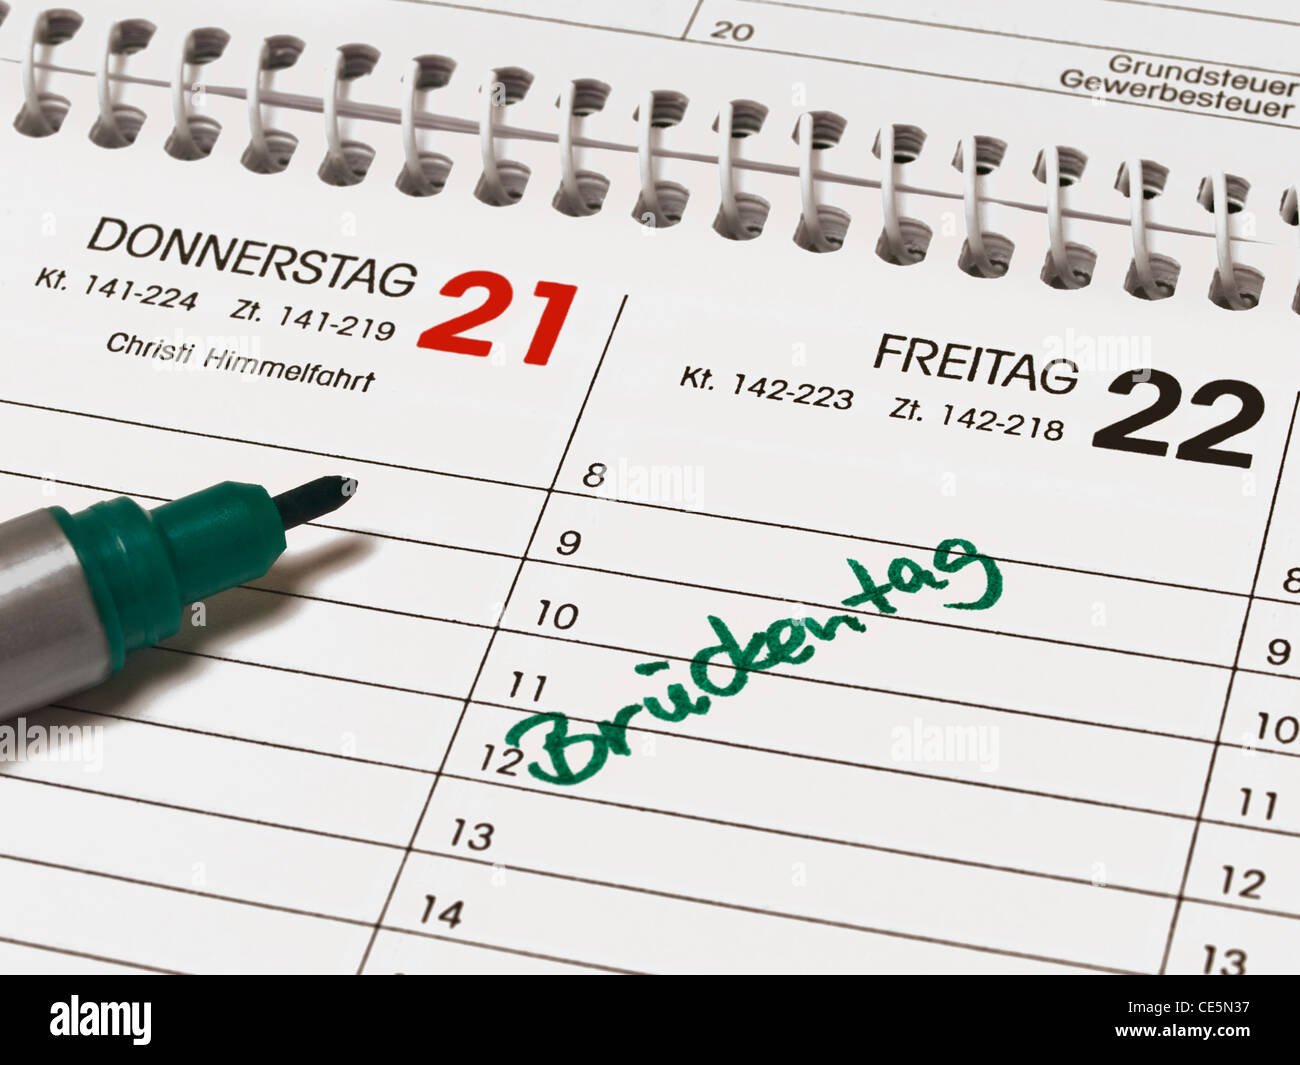 Thursday the 21th, Ascension Day and Friday the 22th. On Friday the item bridging day is in the calendar written in German. Stock Photo